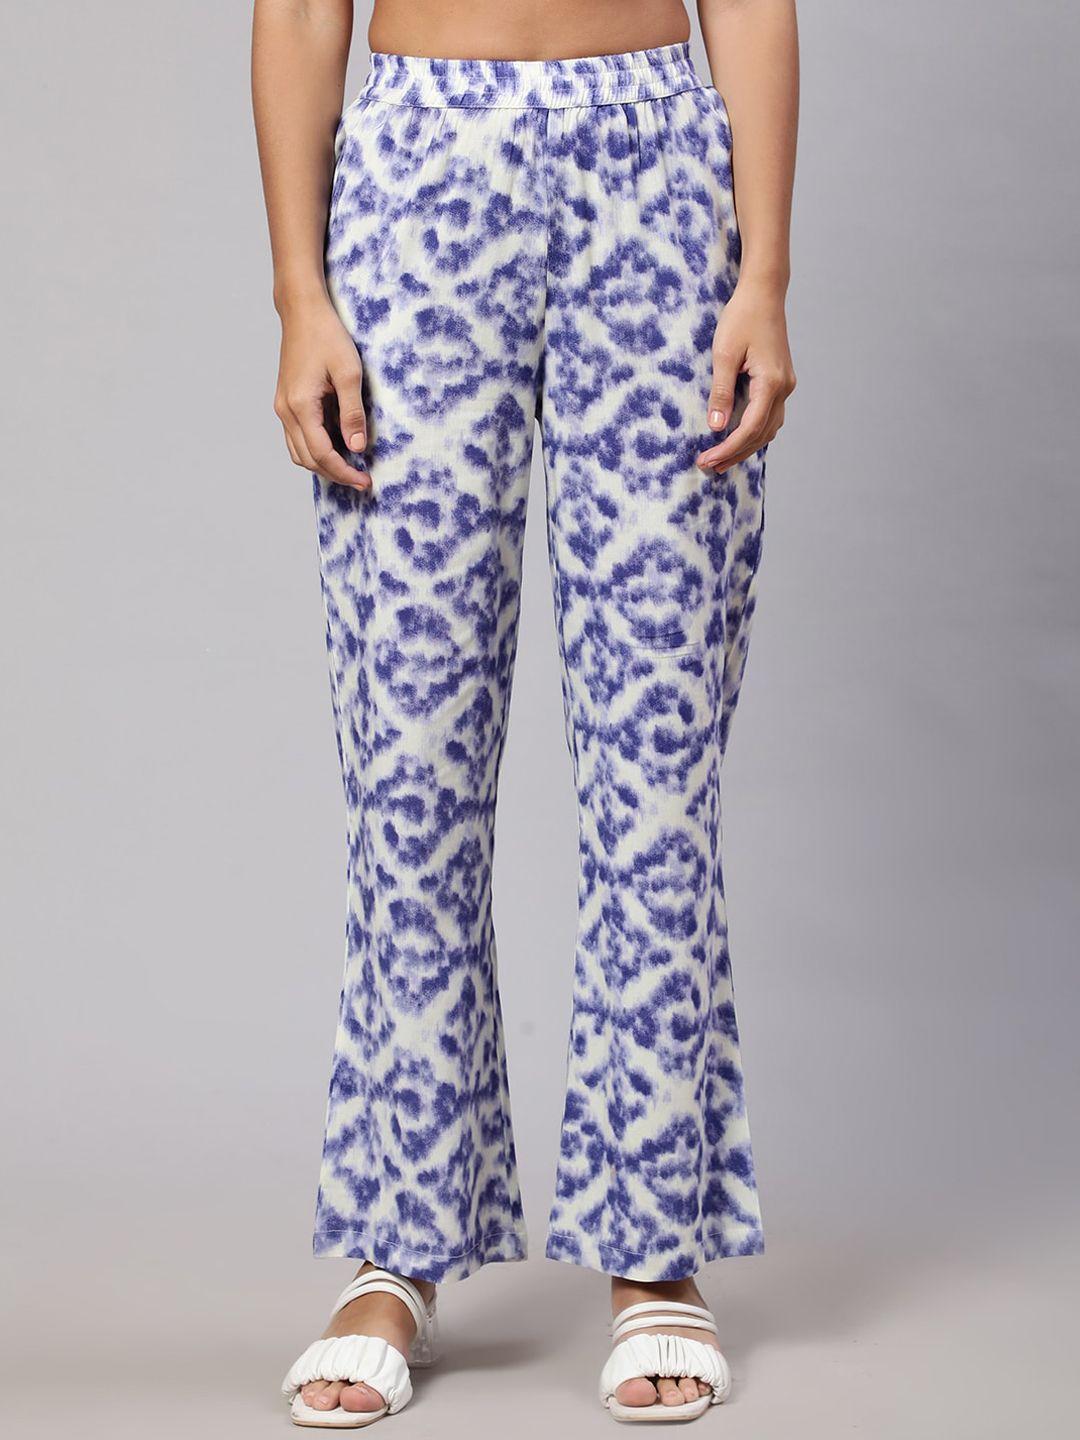 daevish-women-tie-dye-printed-smart-loose-fit-parallel-trousers